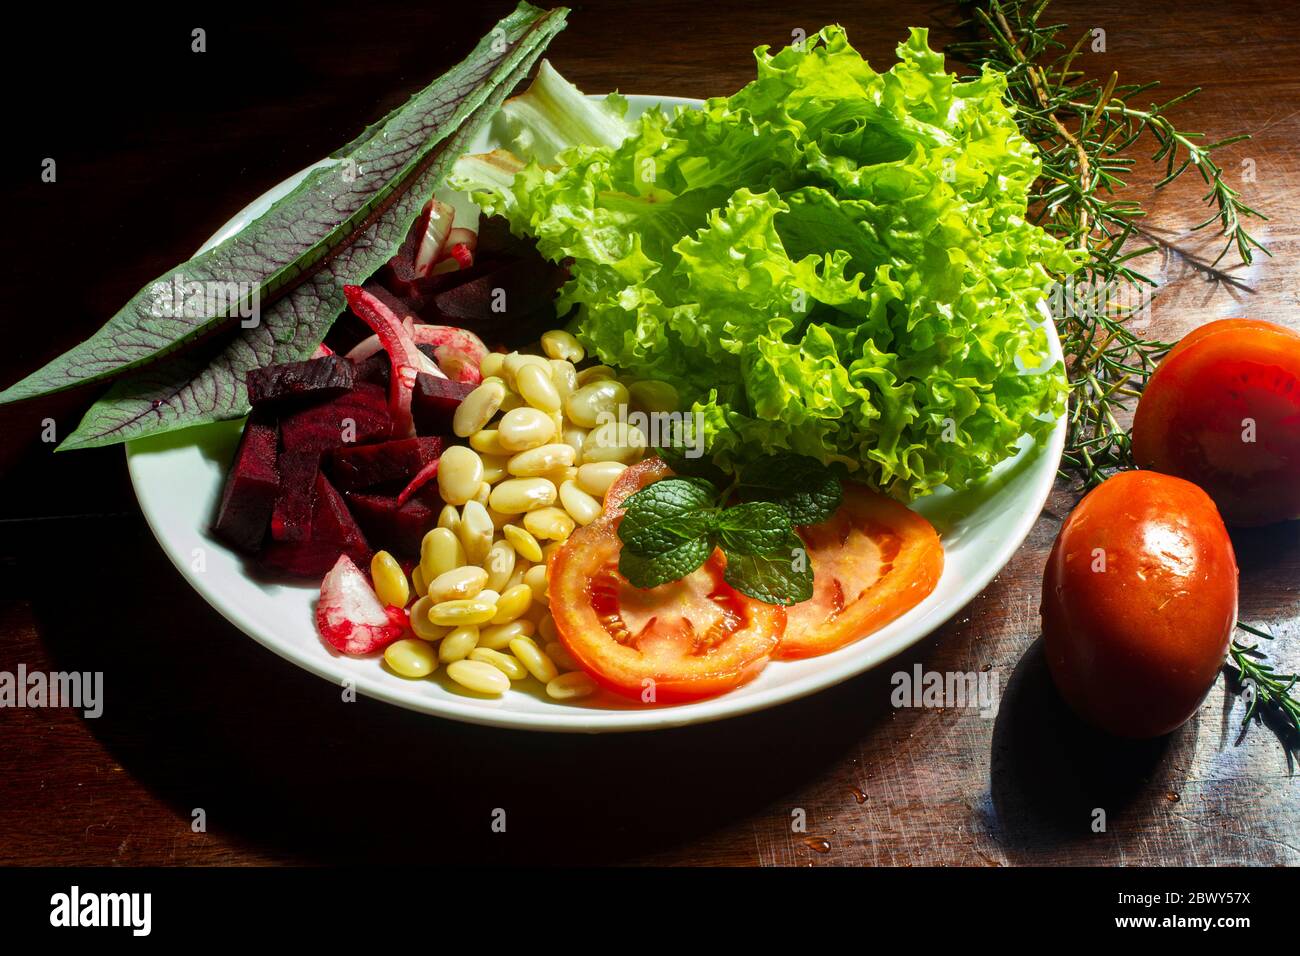 Vegan food. Plate of lettuce, beet, fava and tomato Stock Photo